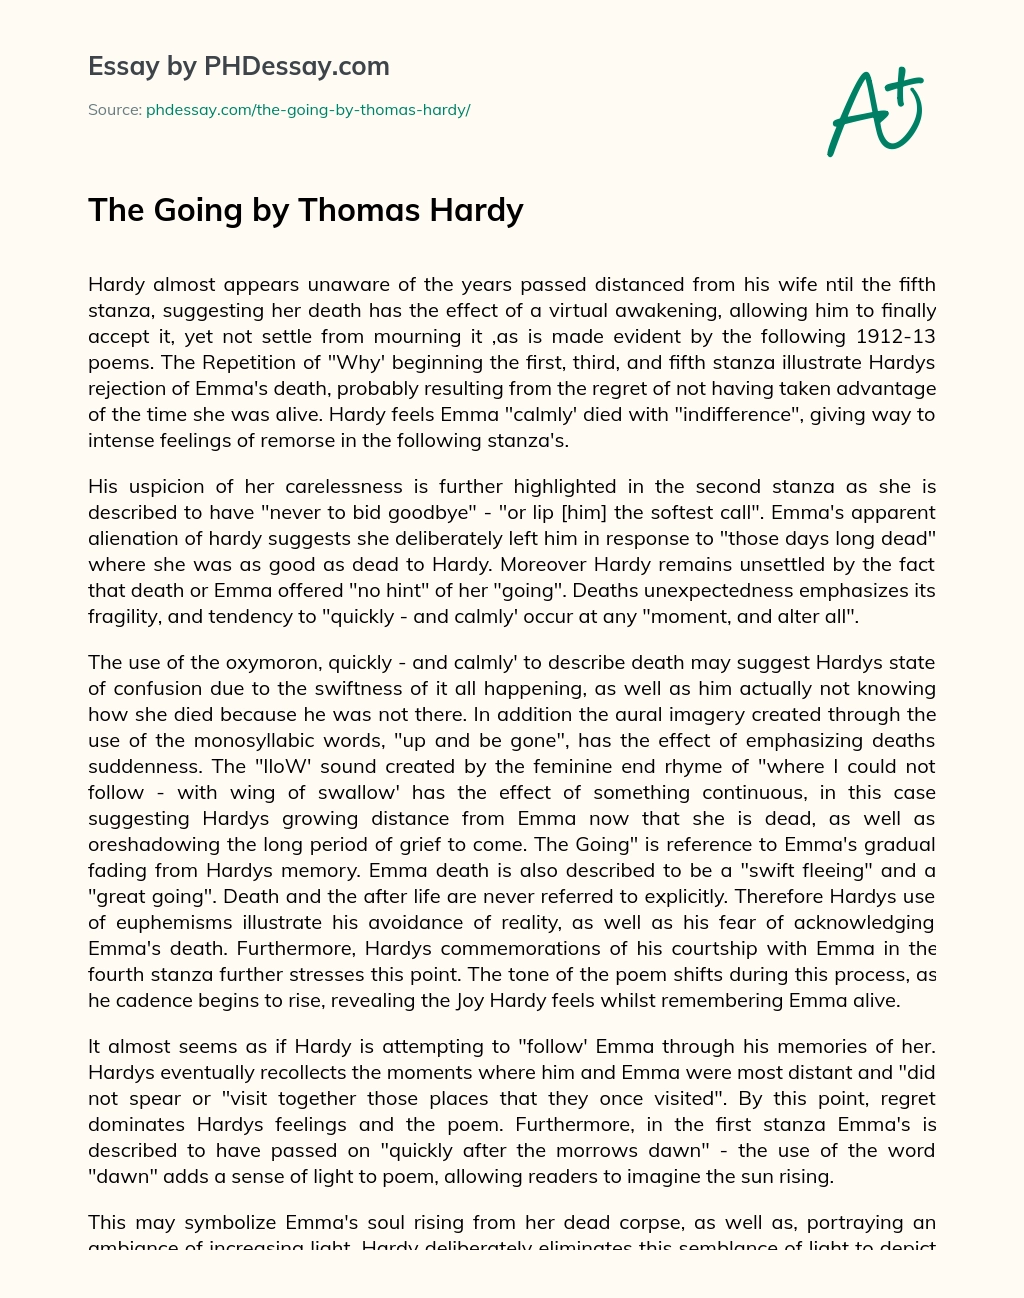 The Going by Thomas Hardy essay